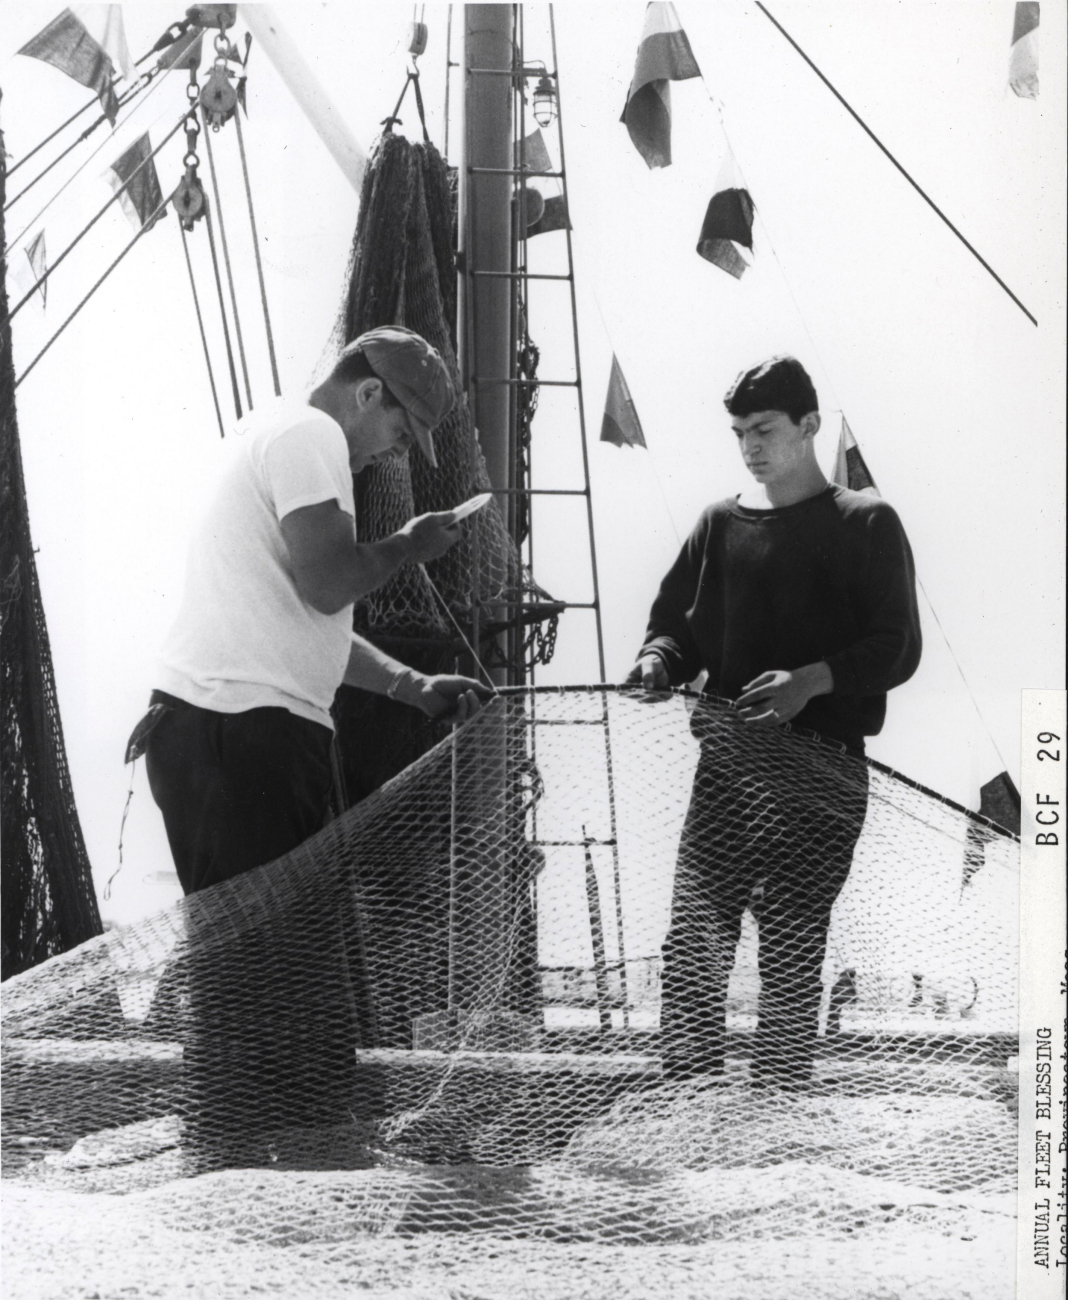 Repairing nets at Provincetown preparatory to Annual Fleet Blessing